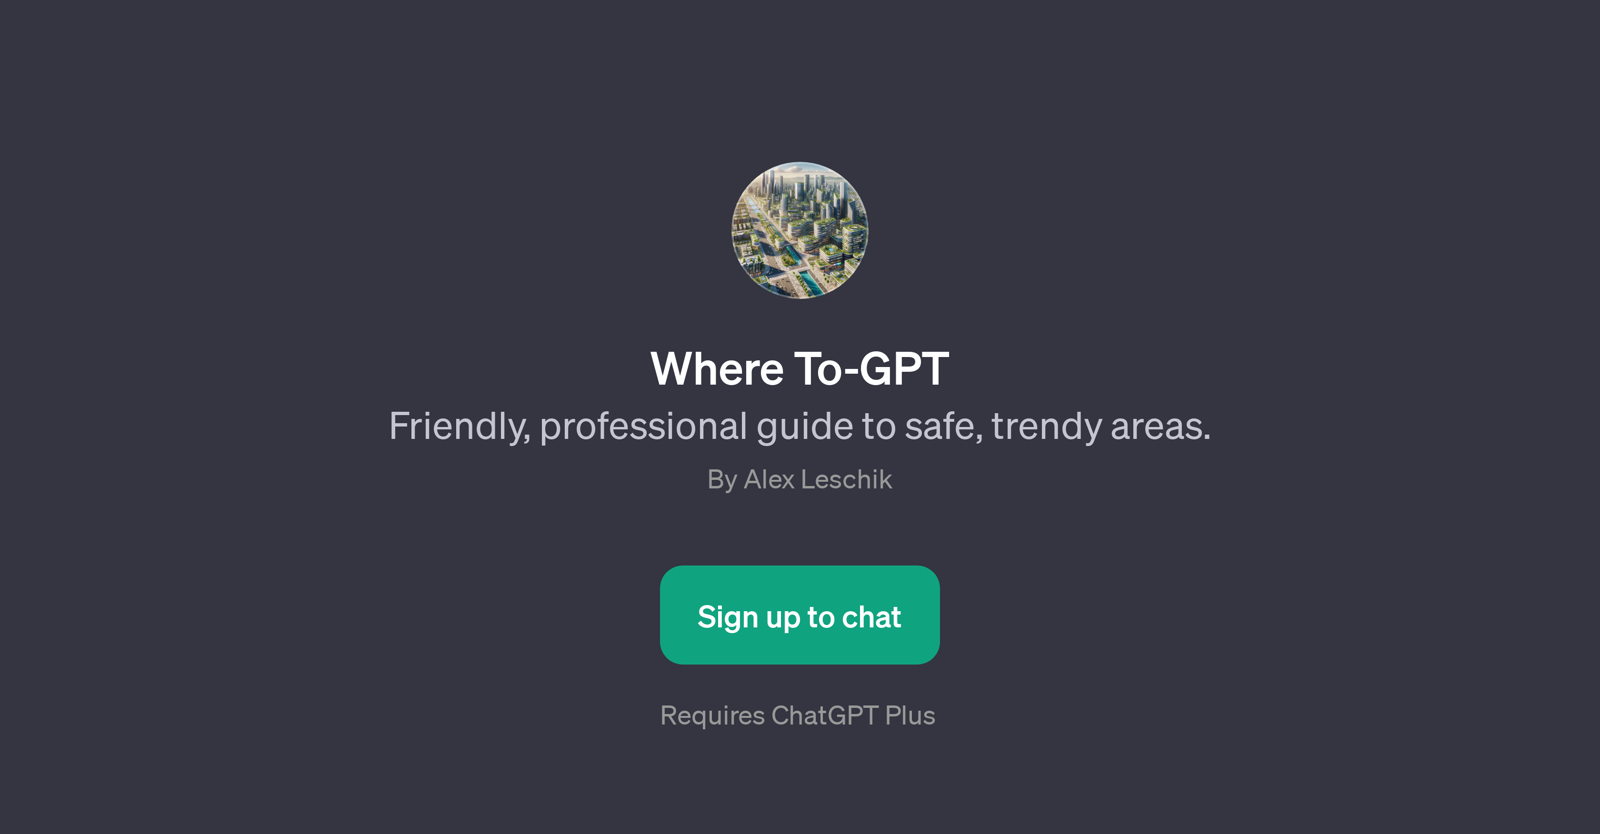 Where To-GPT website